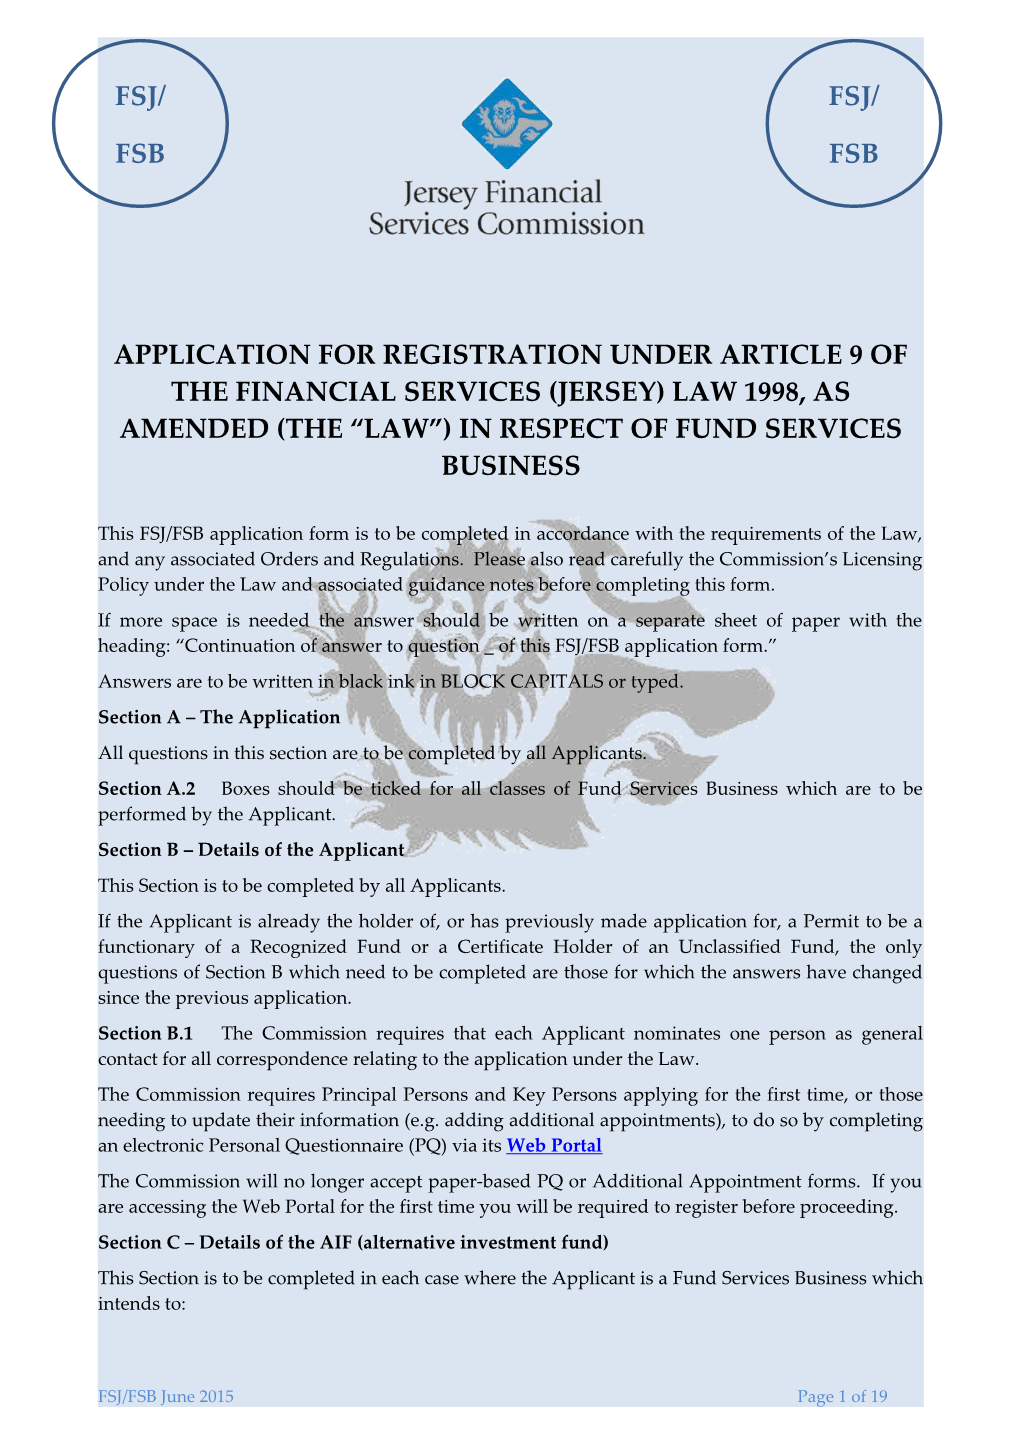 Application for Registration Under Article 9 of the FINANCIAL SERVICES (JERSEY) LAW 1998